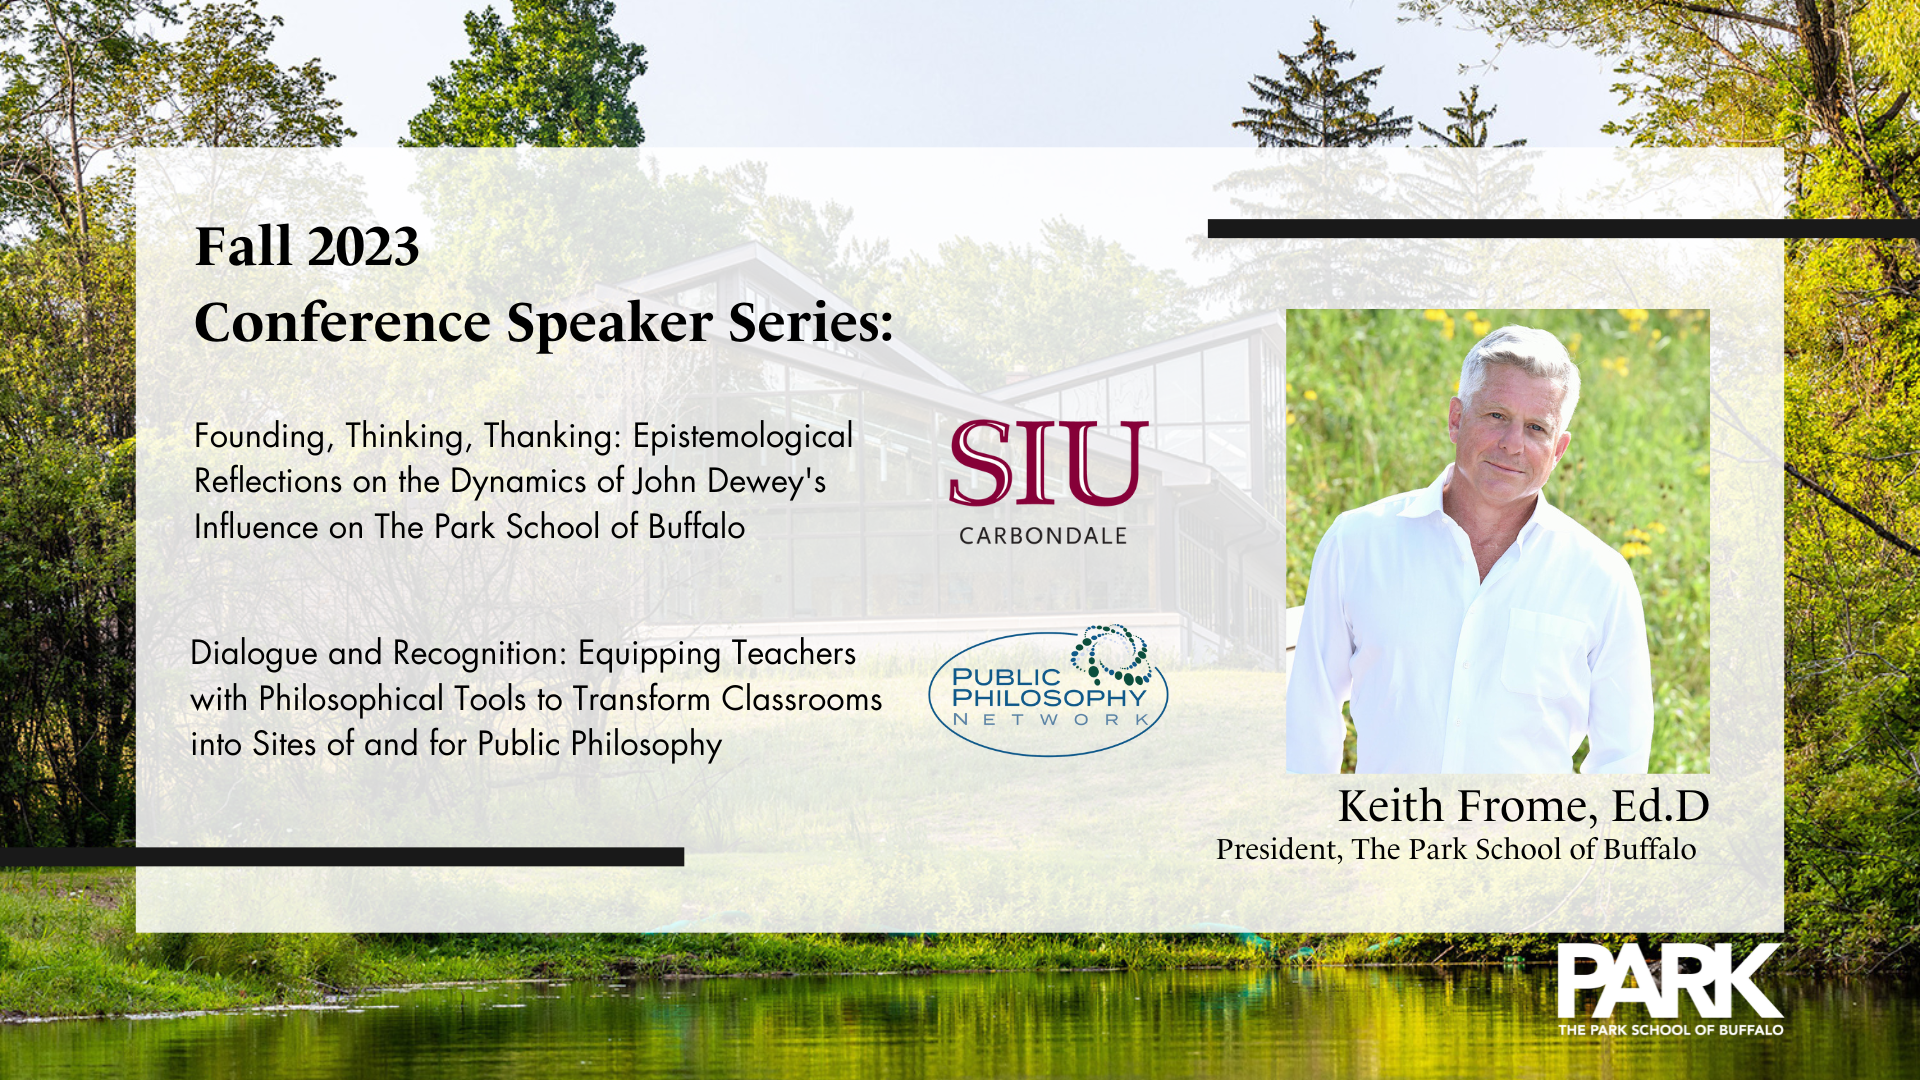 Fall 2023 Conference Speaker: Keith Frome